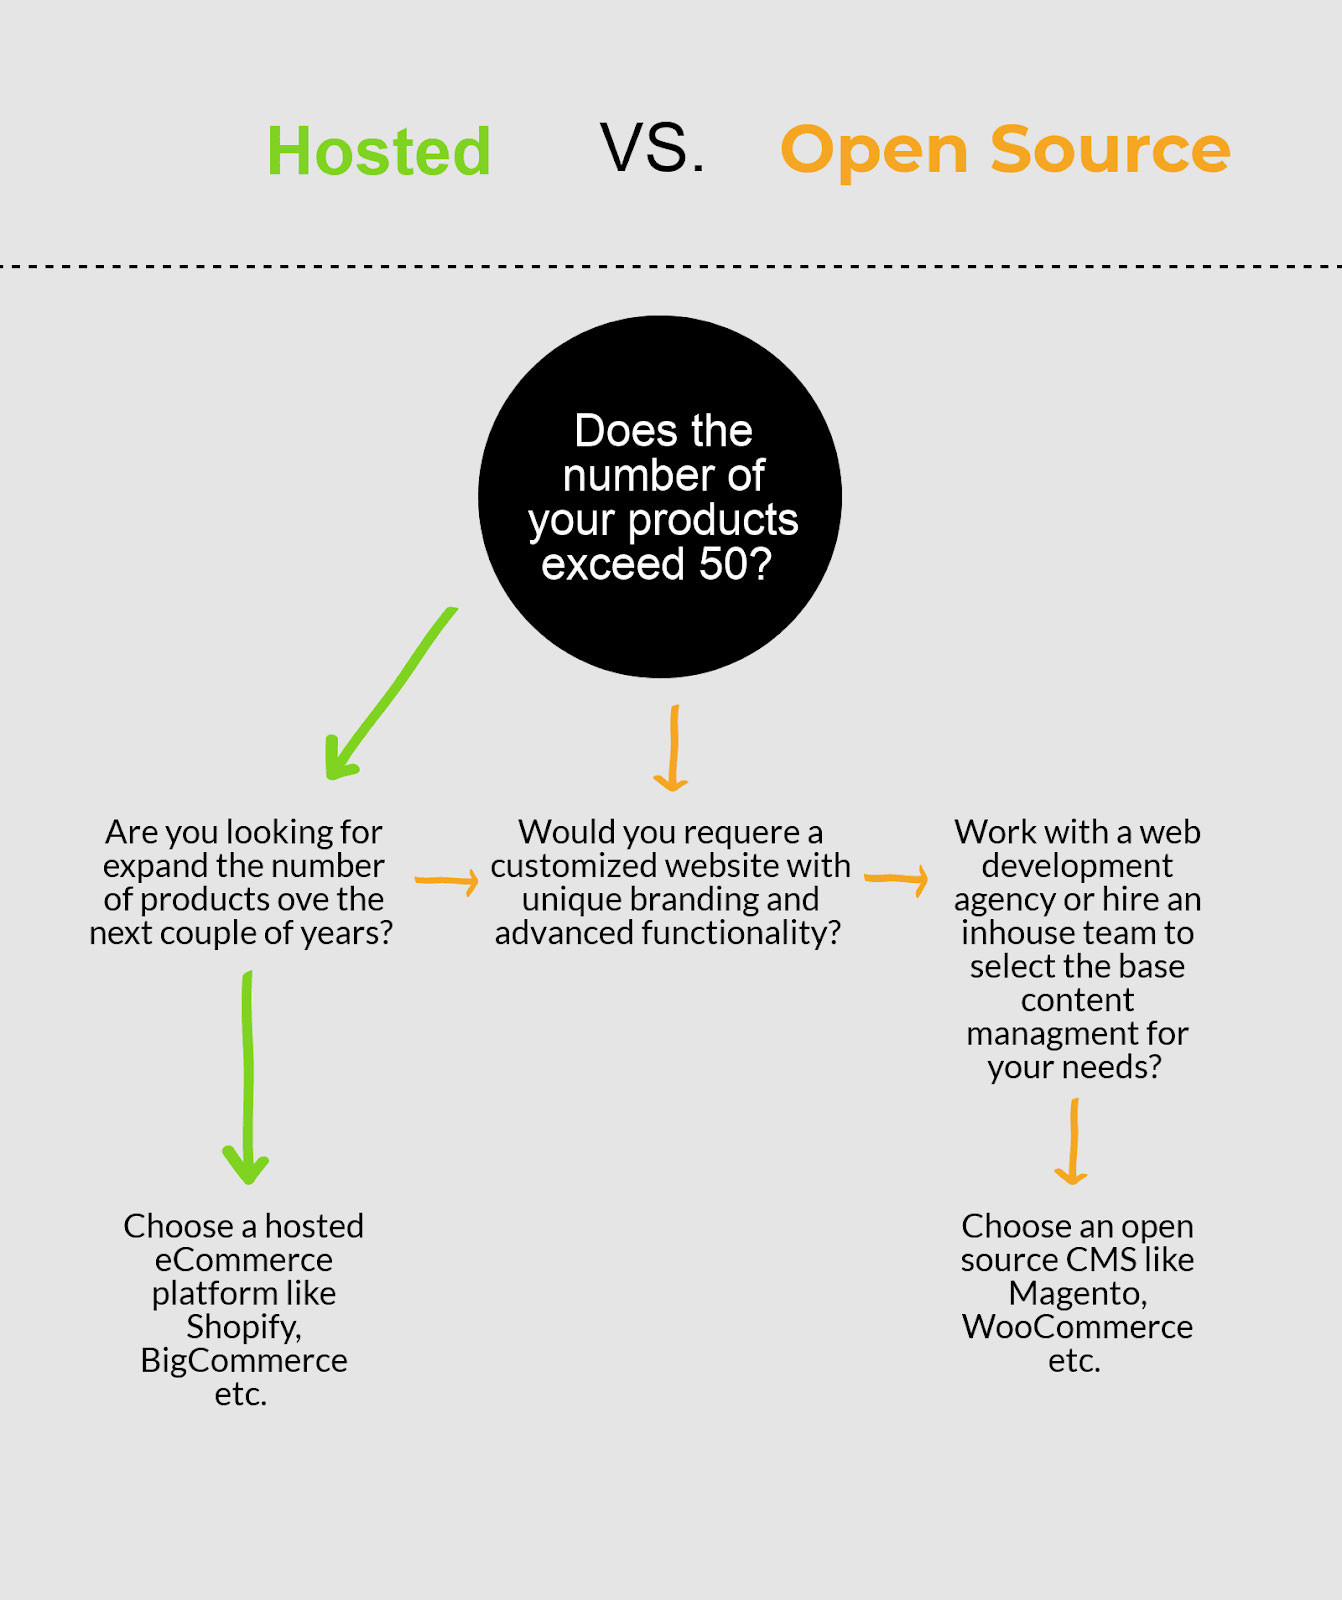 decide whether you need an open source eCommerce solution or another type of platform